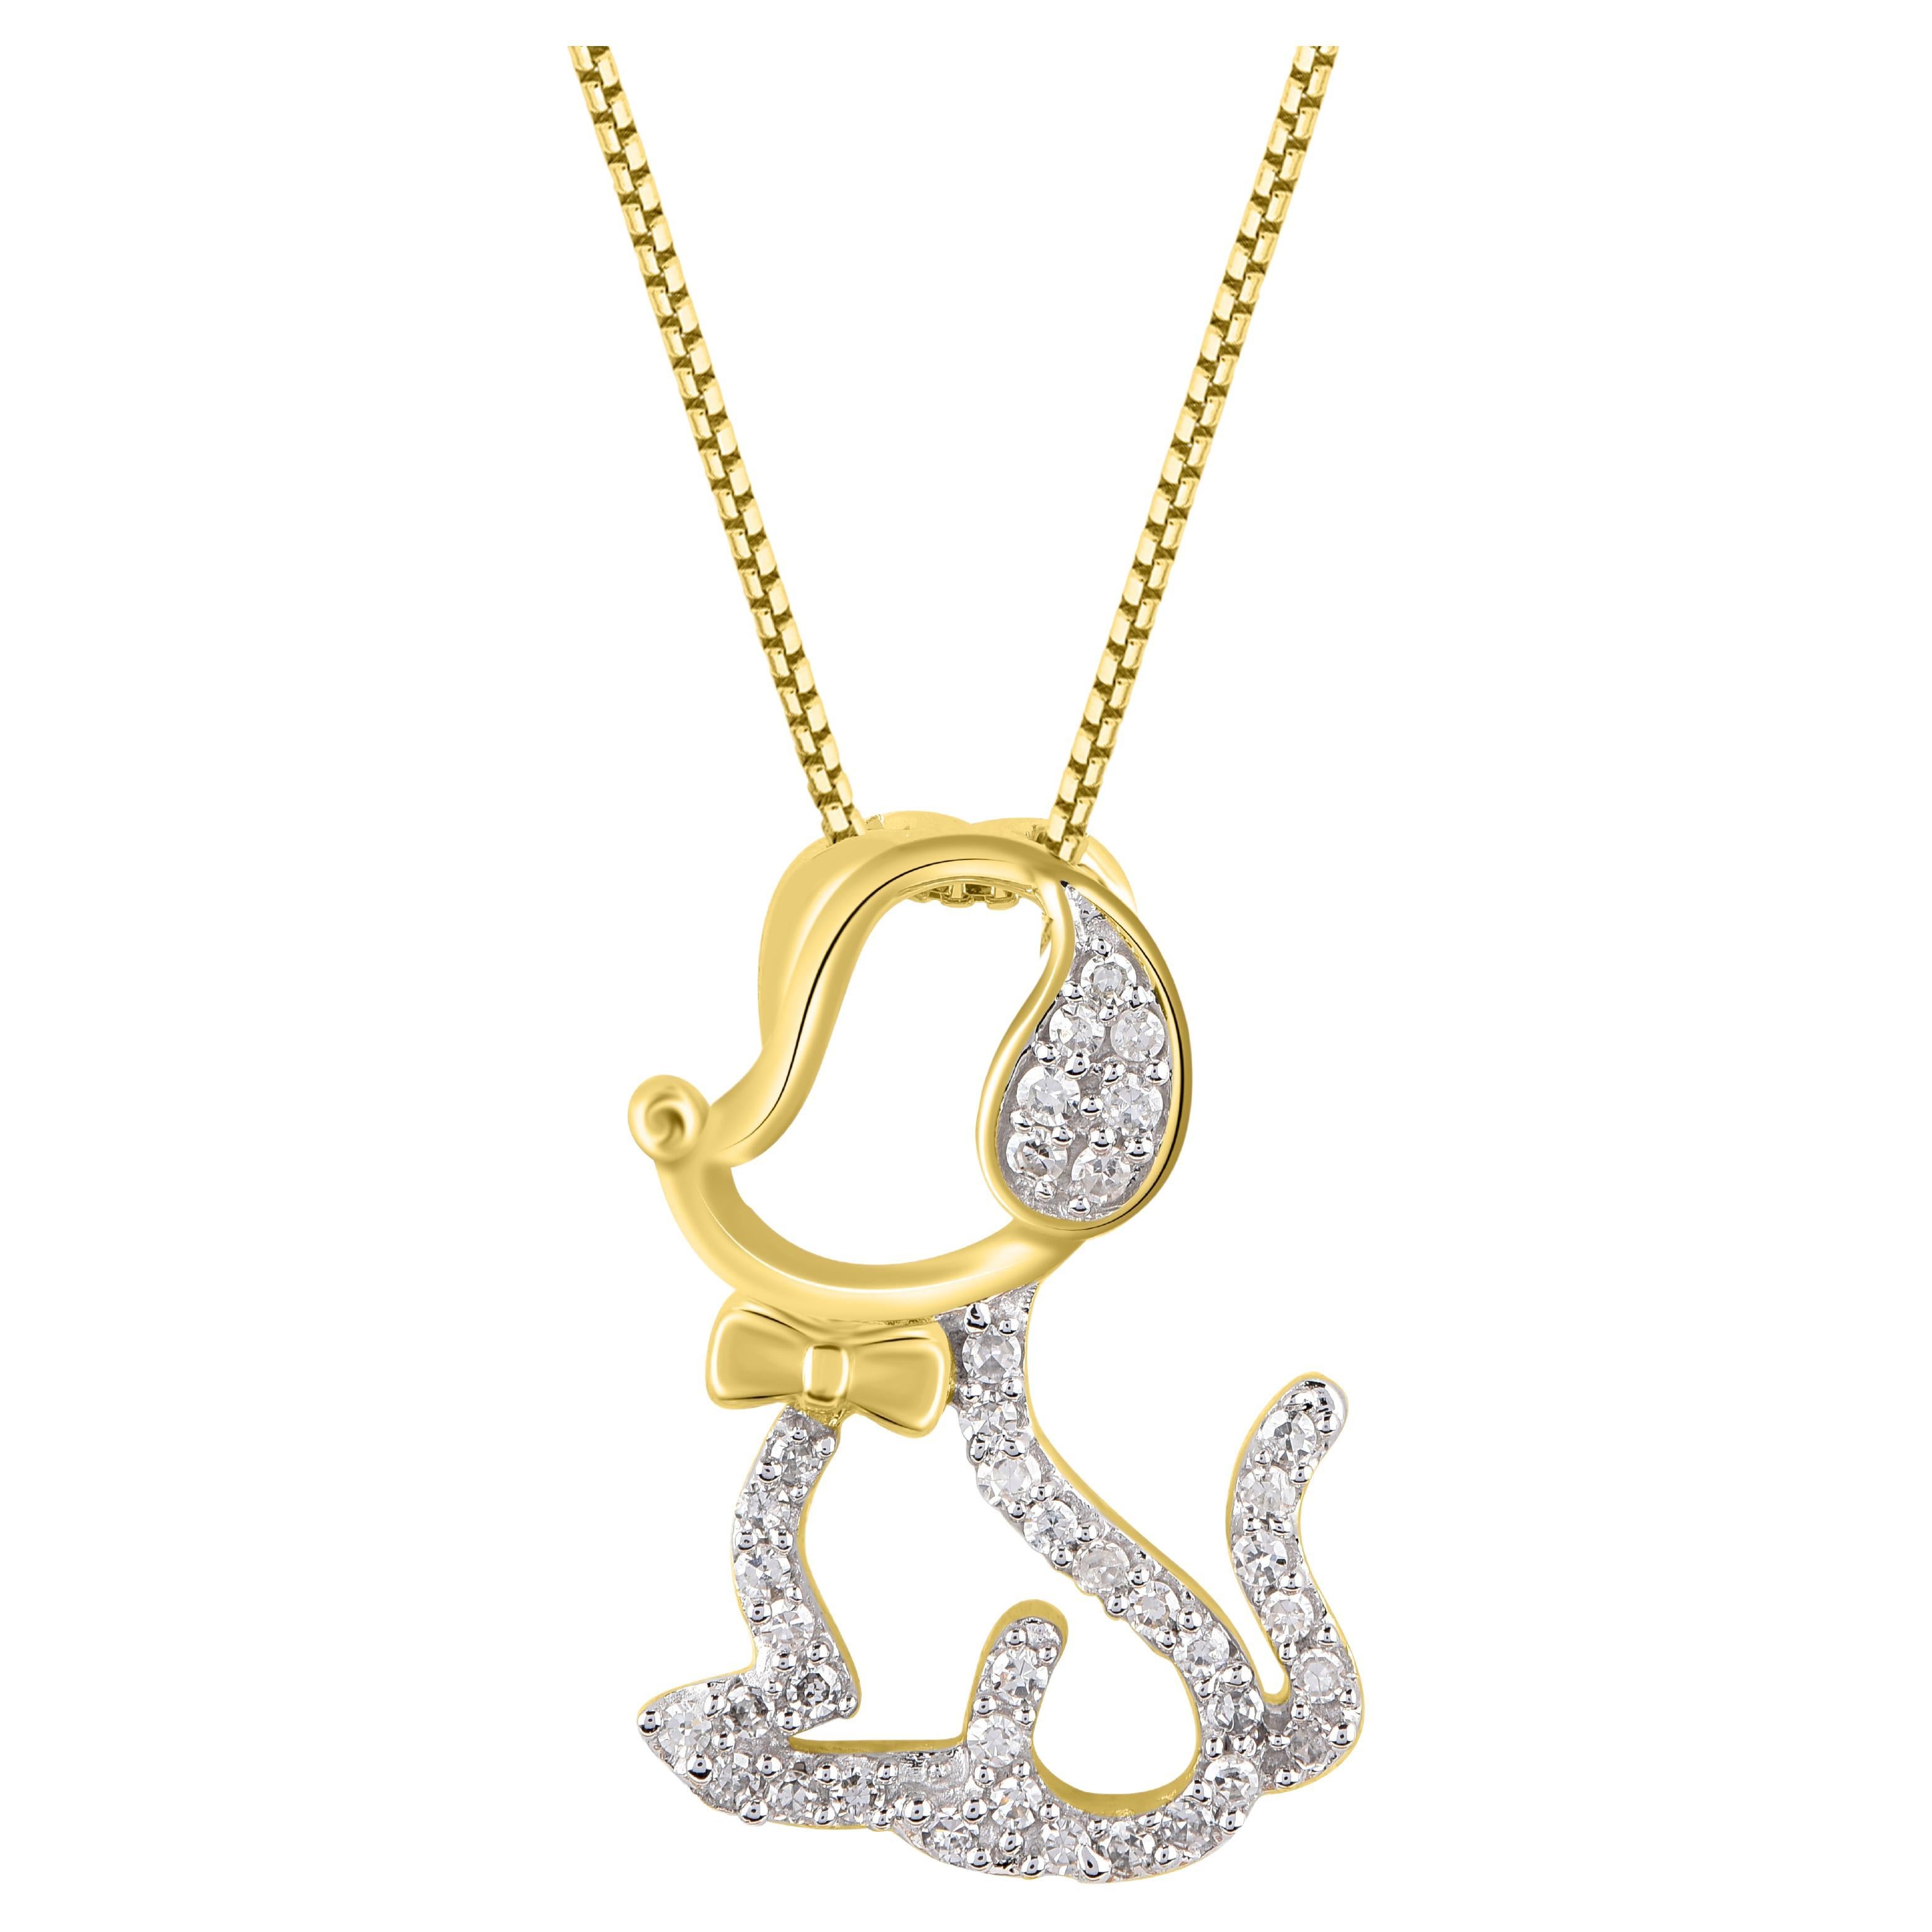 TJD 0.10 Carat Natural Round Diamond 14KT Yellow Gold Puppy Dog Pendant Necklace For Sale